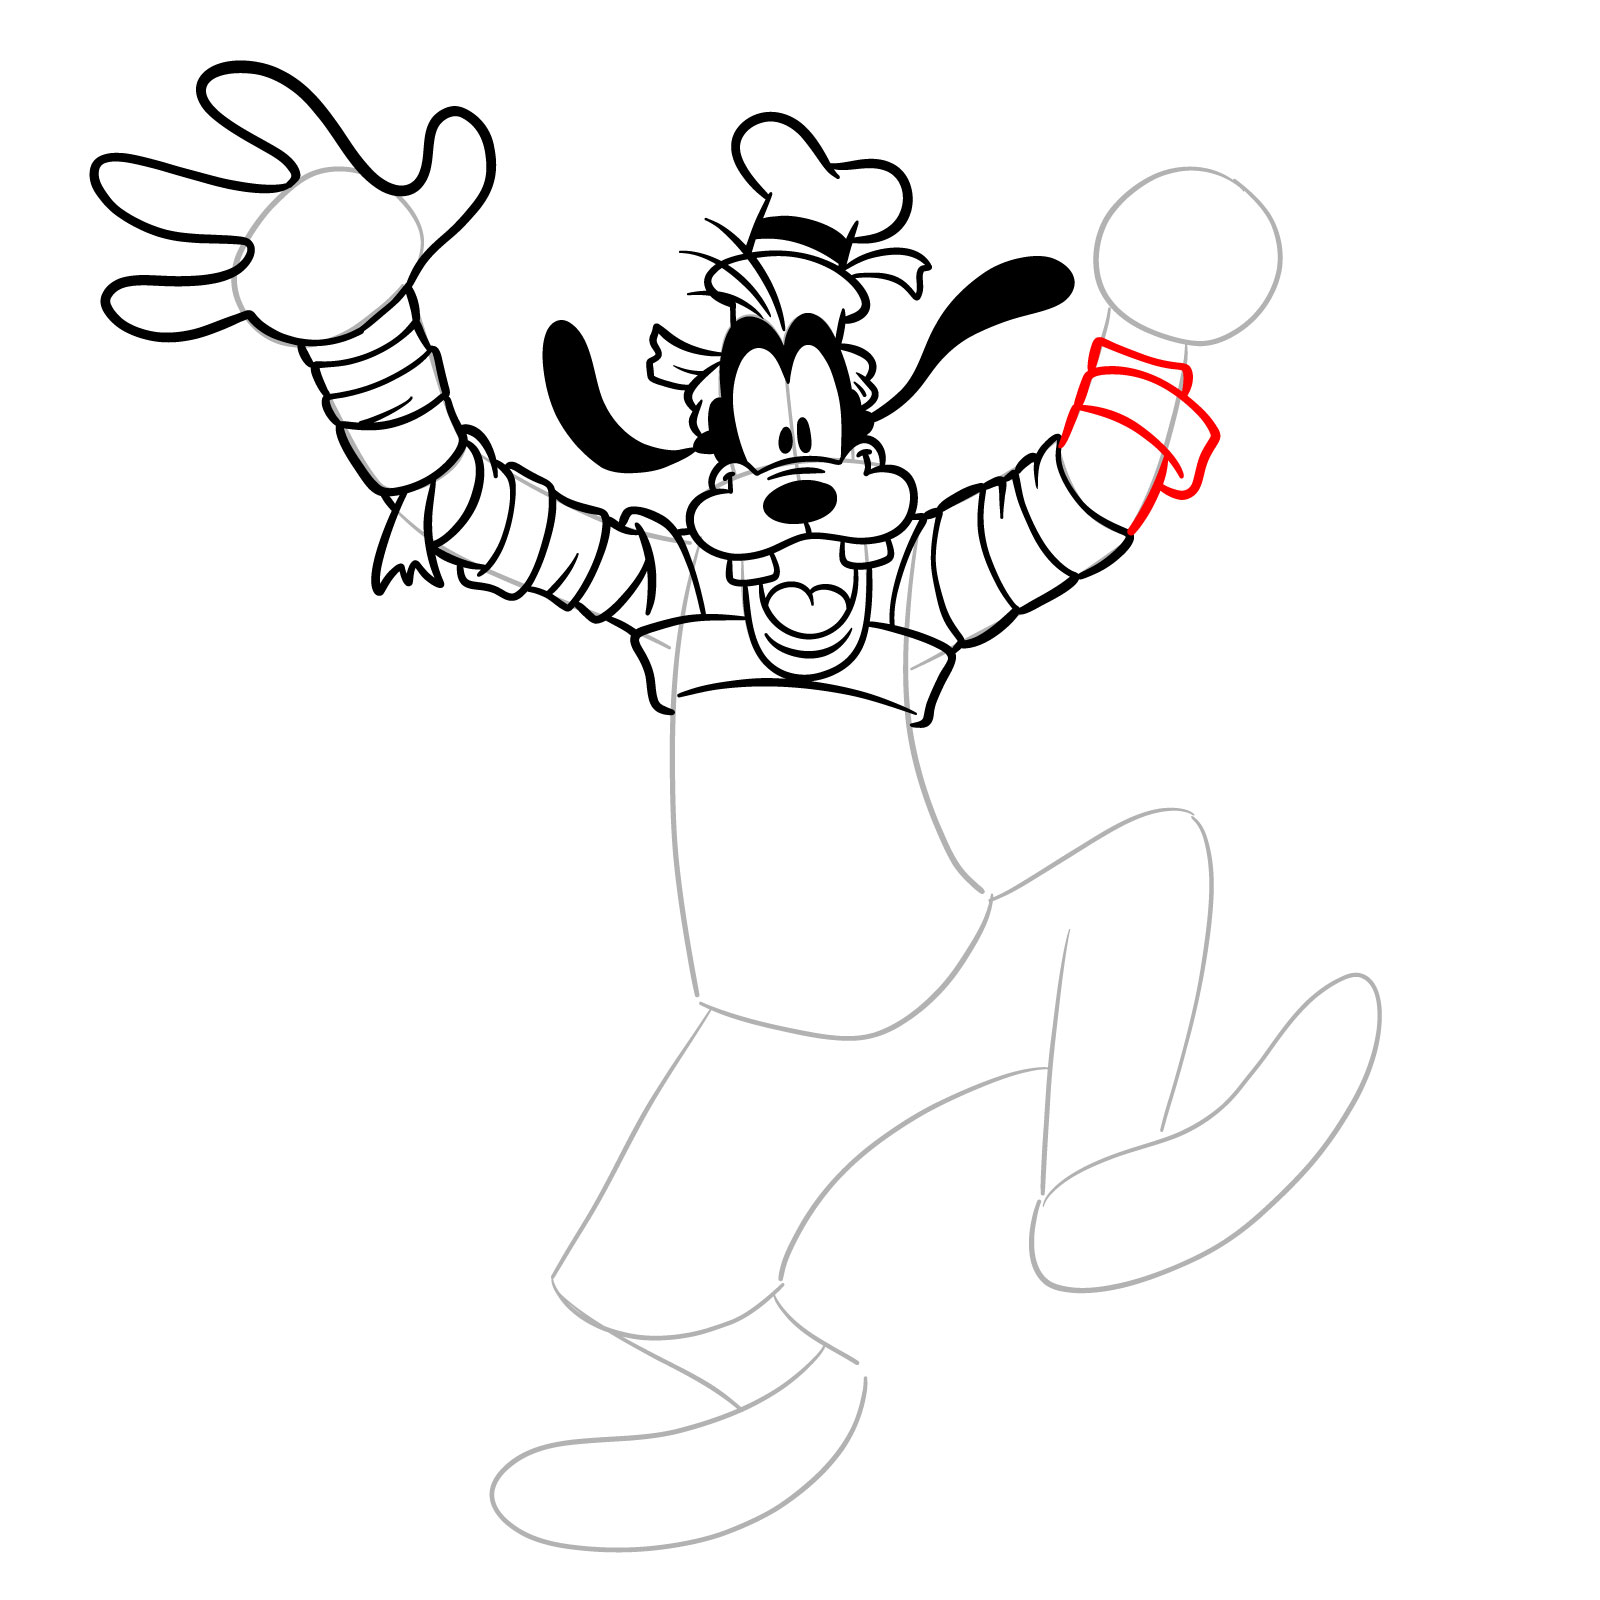 How to draw Halloween Goofy as a mummy - step 18